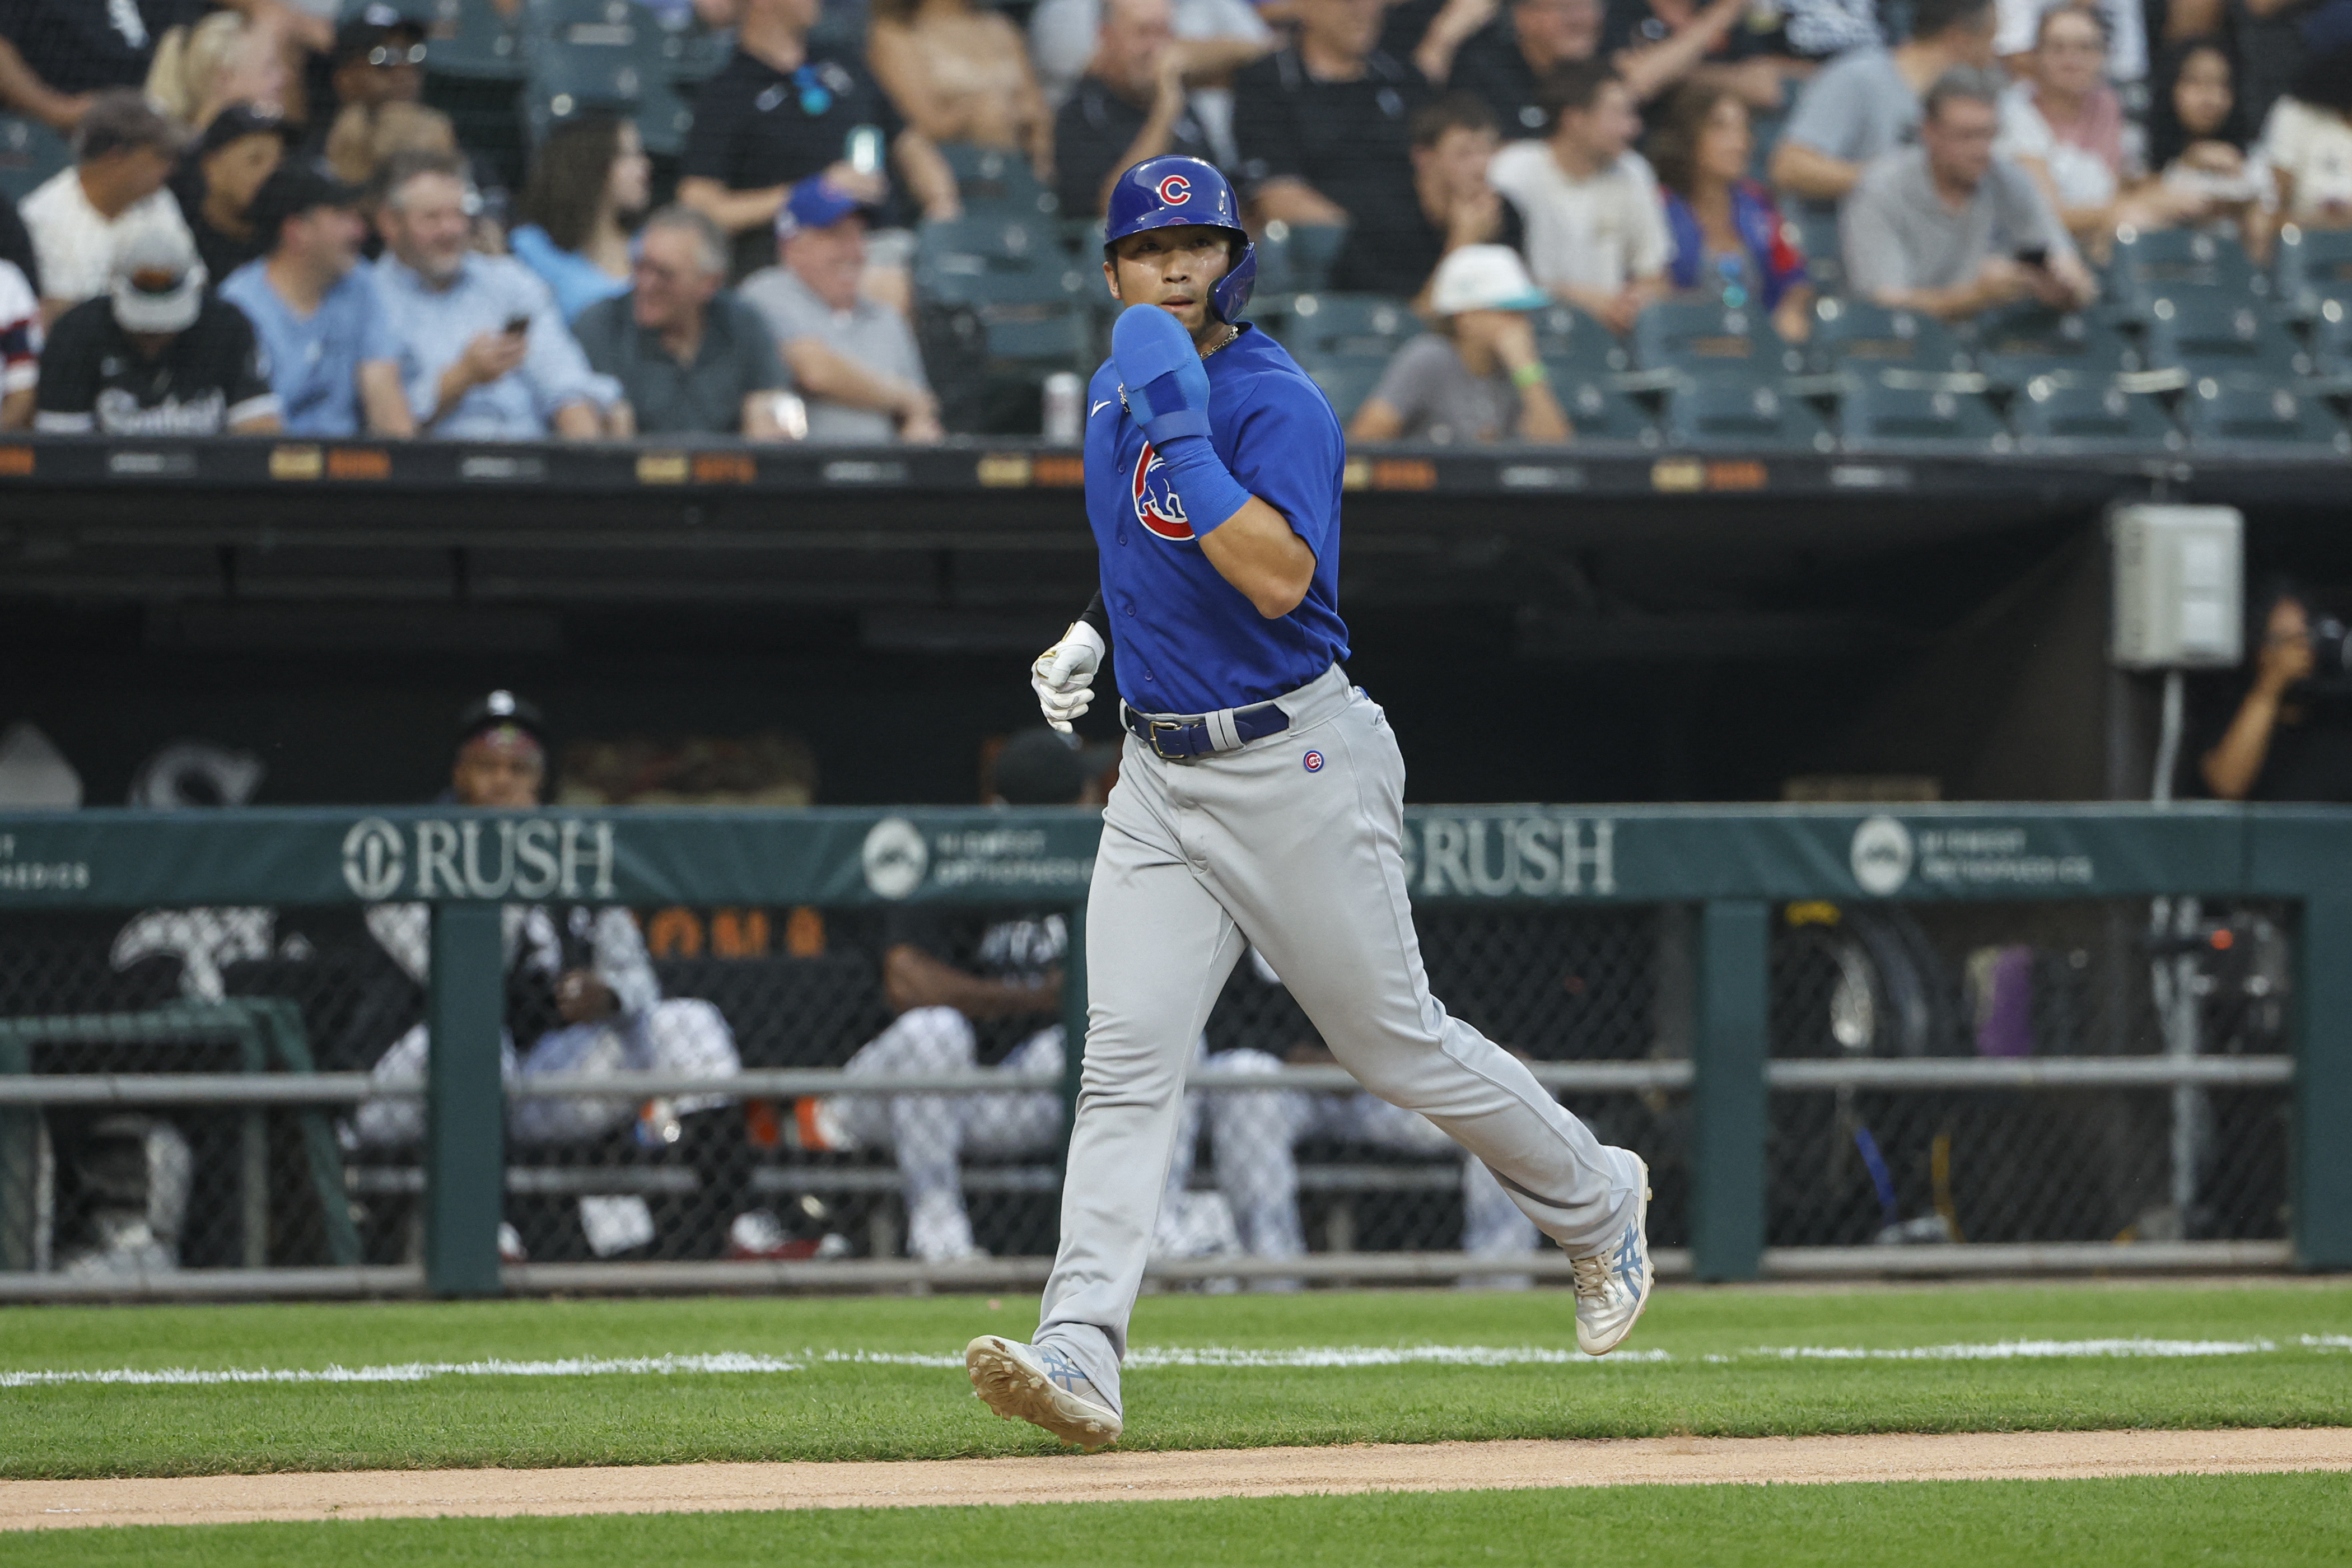 Cubs' Dansby Swanson hits 2 HRs in 7-3 victory over White Sox